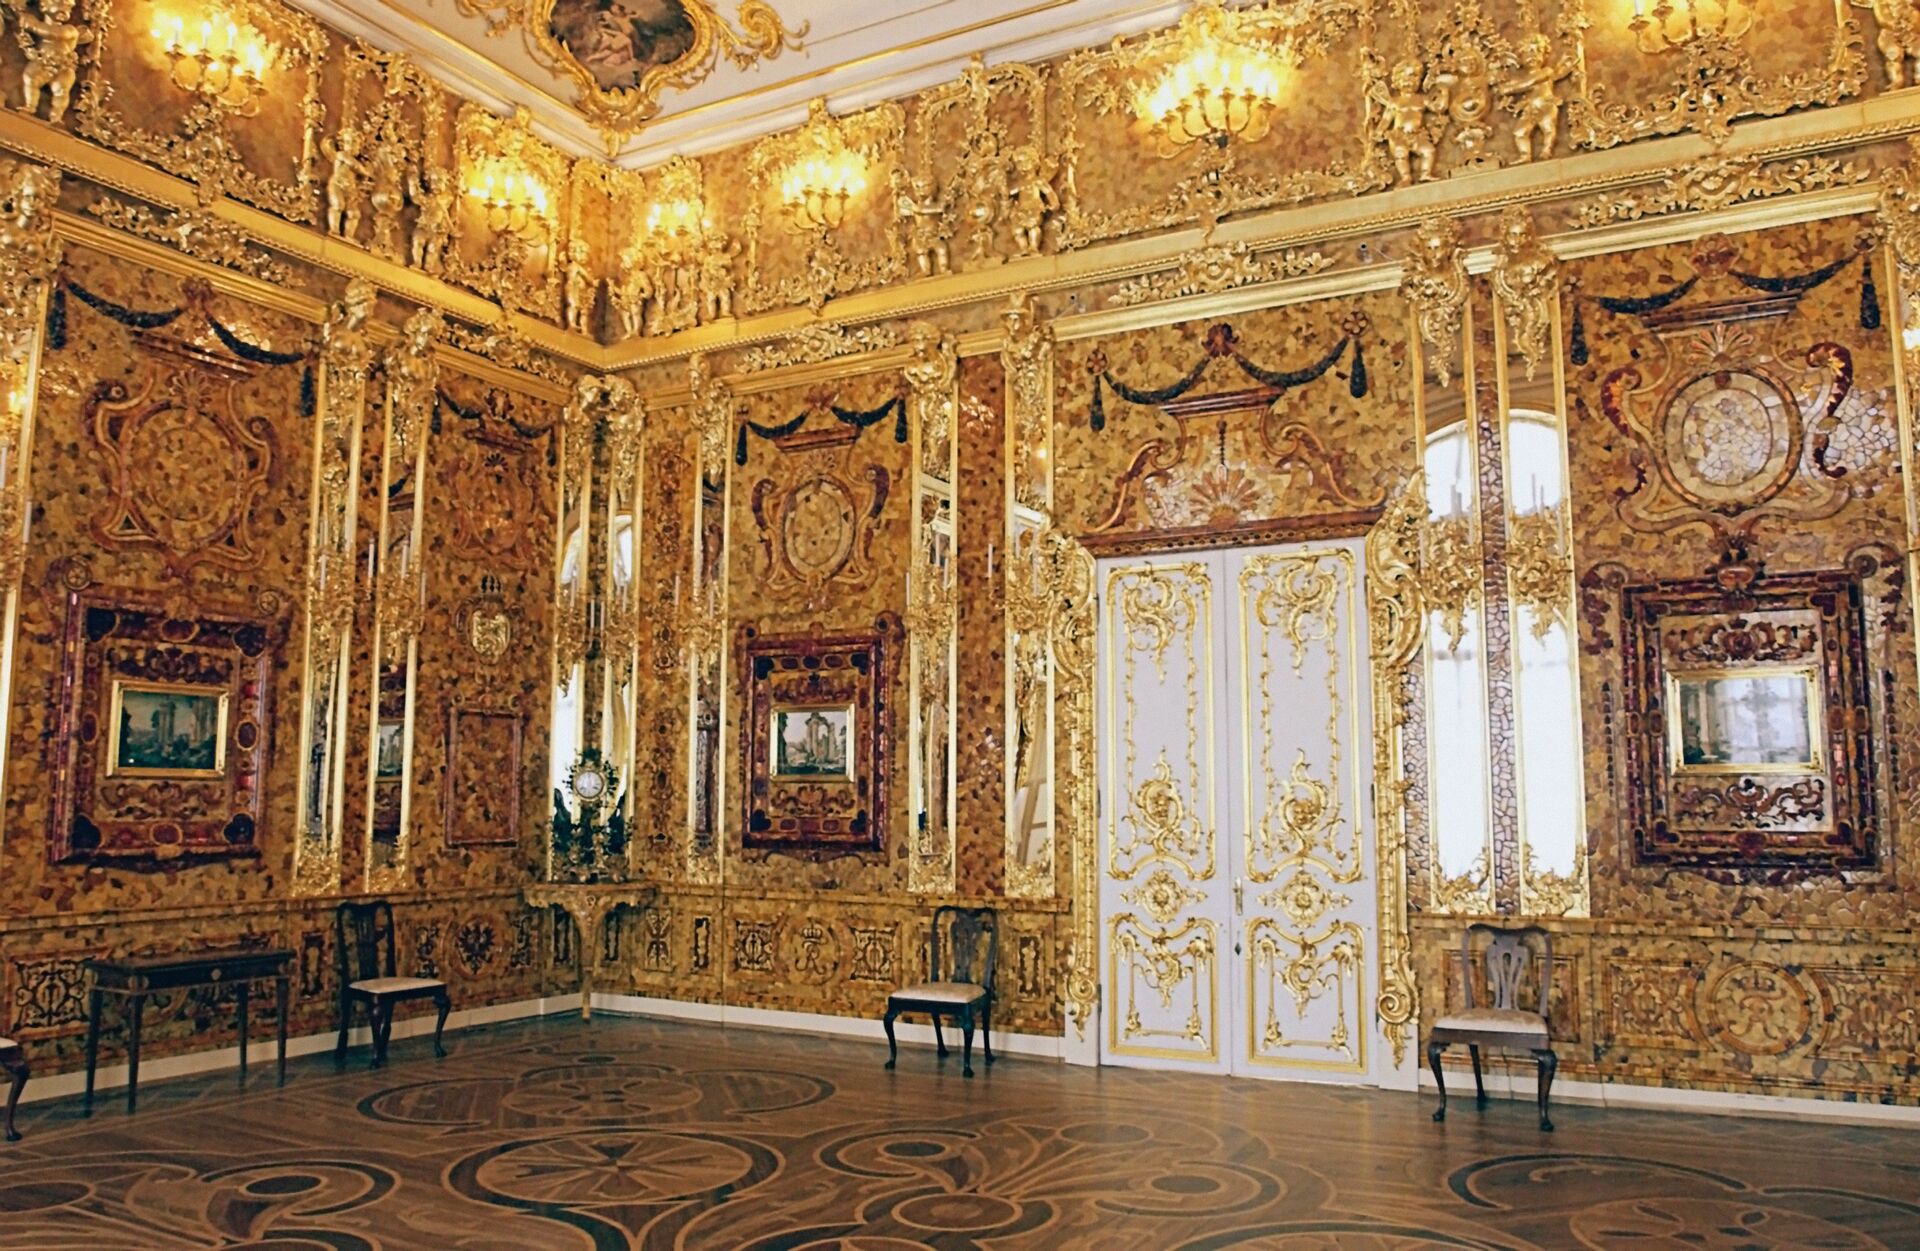 'Amber Room': Can Russia's 'Eighth Wonder of the World' Lost in World War 2 Still Be Recovered? - Sputnik International, 1920, 06.03.2021